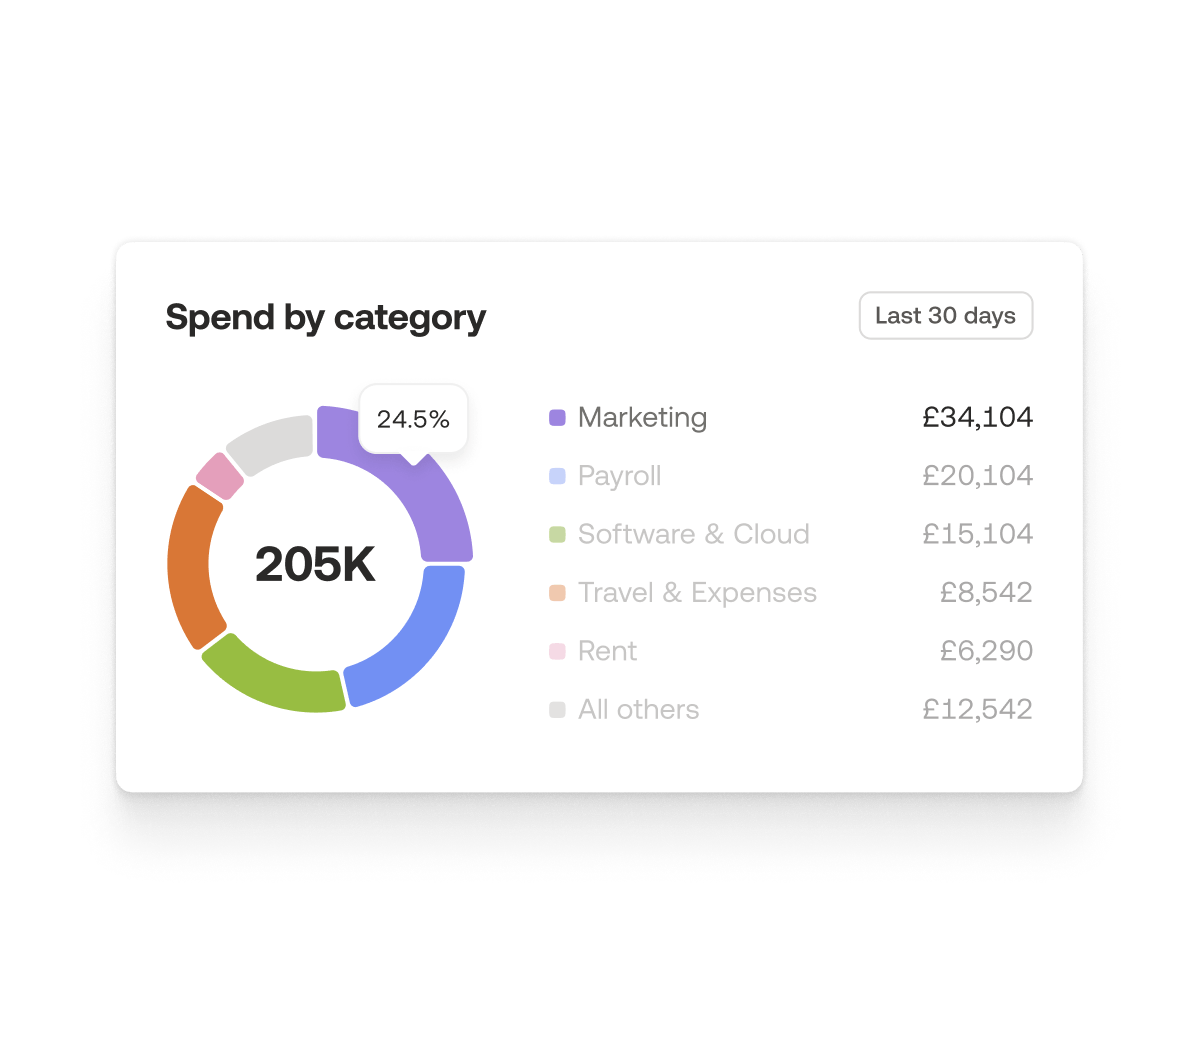 Spend by category graph extracted from the Moss app